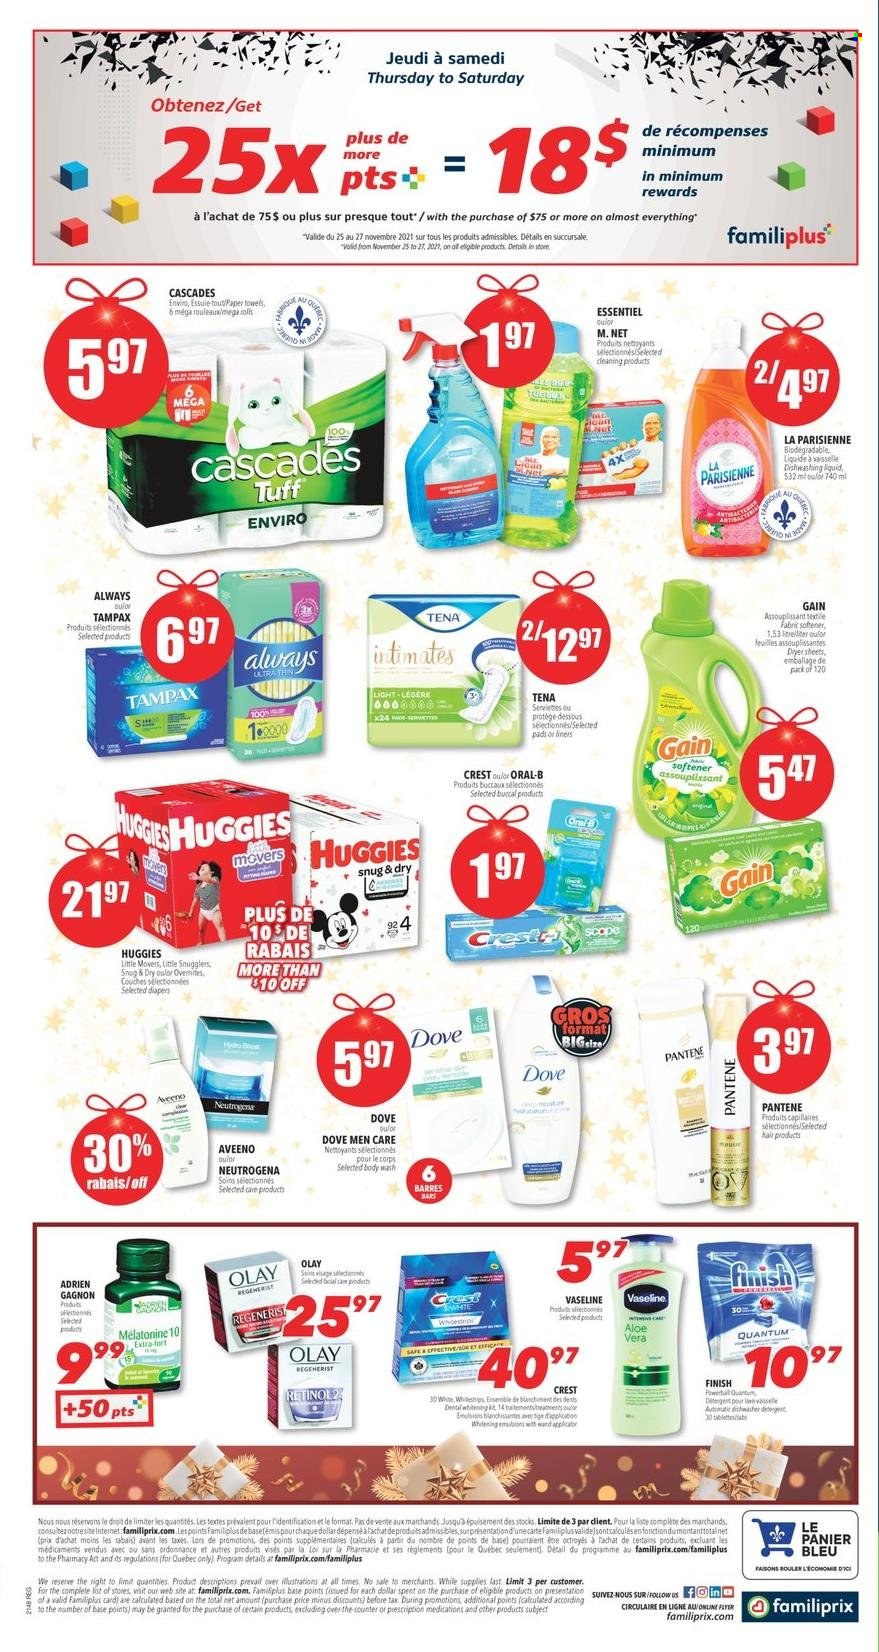 thumbnail - Familiprix Flyer - November 25, 2021 - December 01, 2021 - Sales products - nappies, Aveeno, Gain, fabric softener, Finish Powerball, body wash, Vaseline, Crest, sanitary pads, Olay, detergent, Dove, Neutrogena, Tampax, Huggies, Pantene, Oral-B. Page 9.